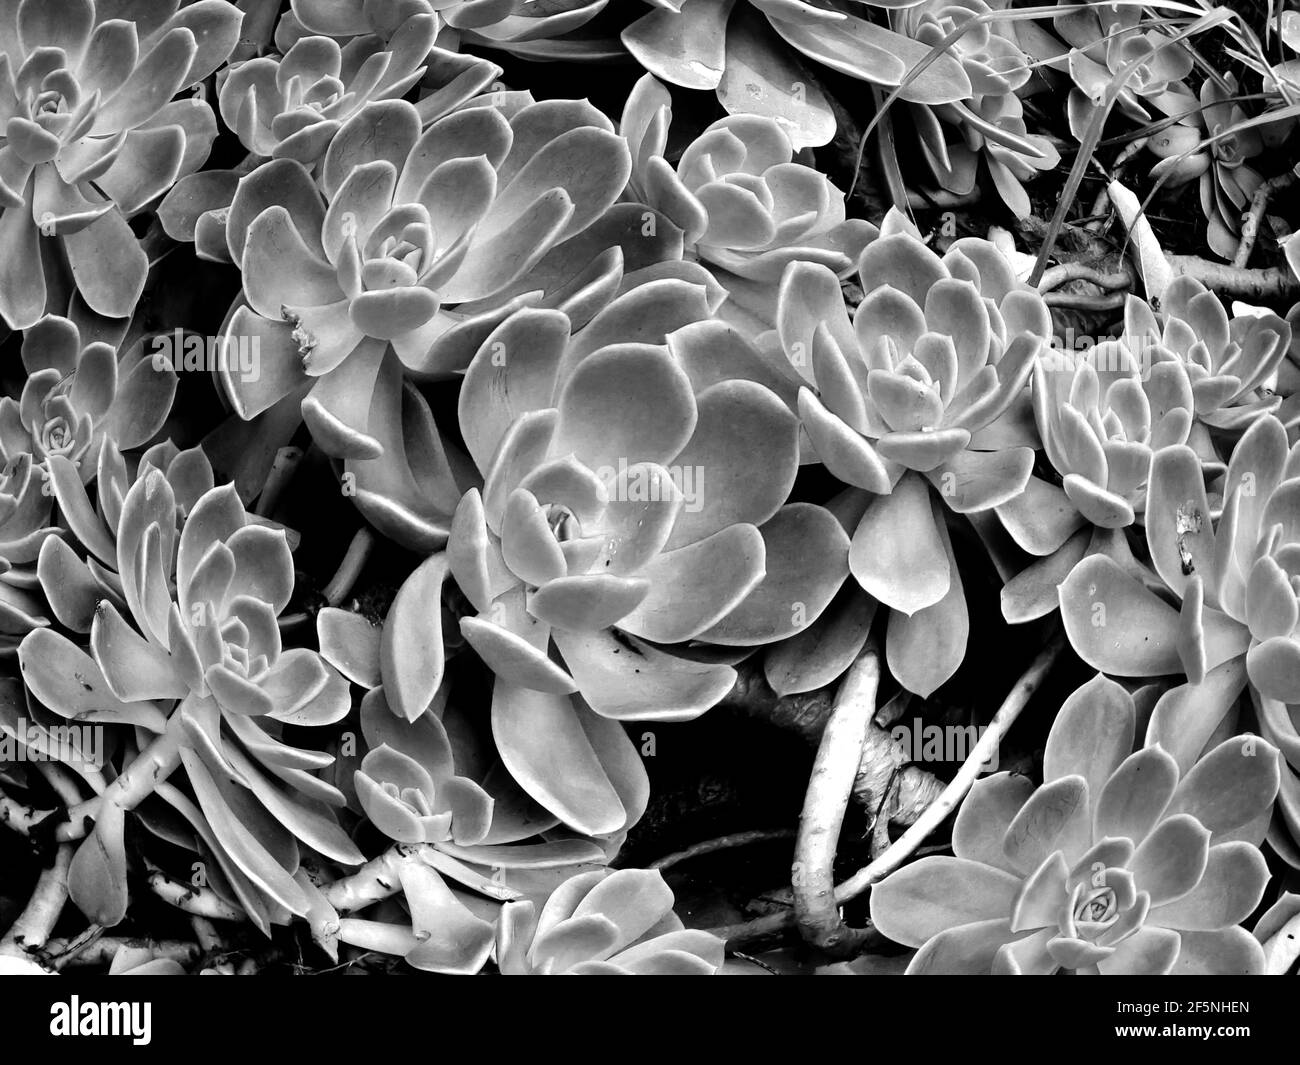 Fish eye of a large amounts Echeveria, in Black and White Stock Photo